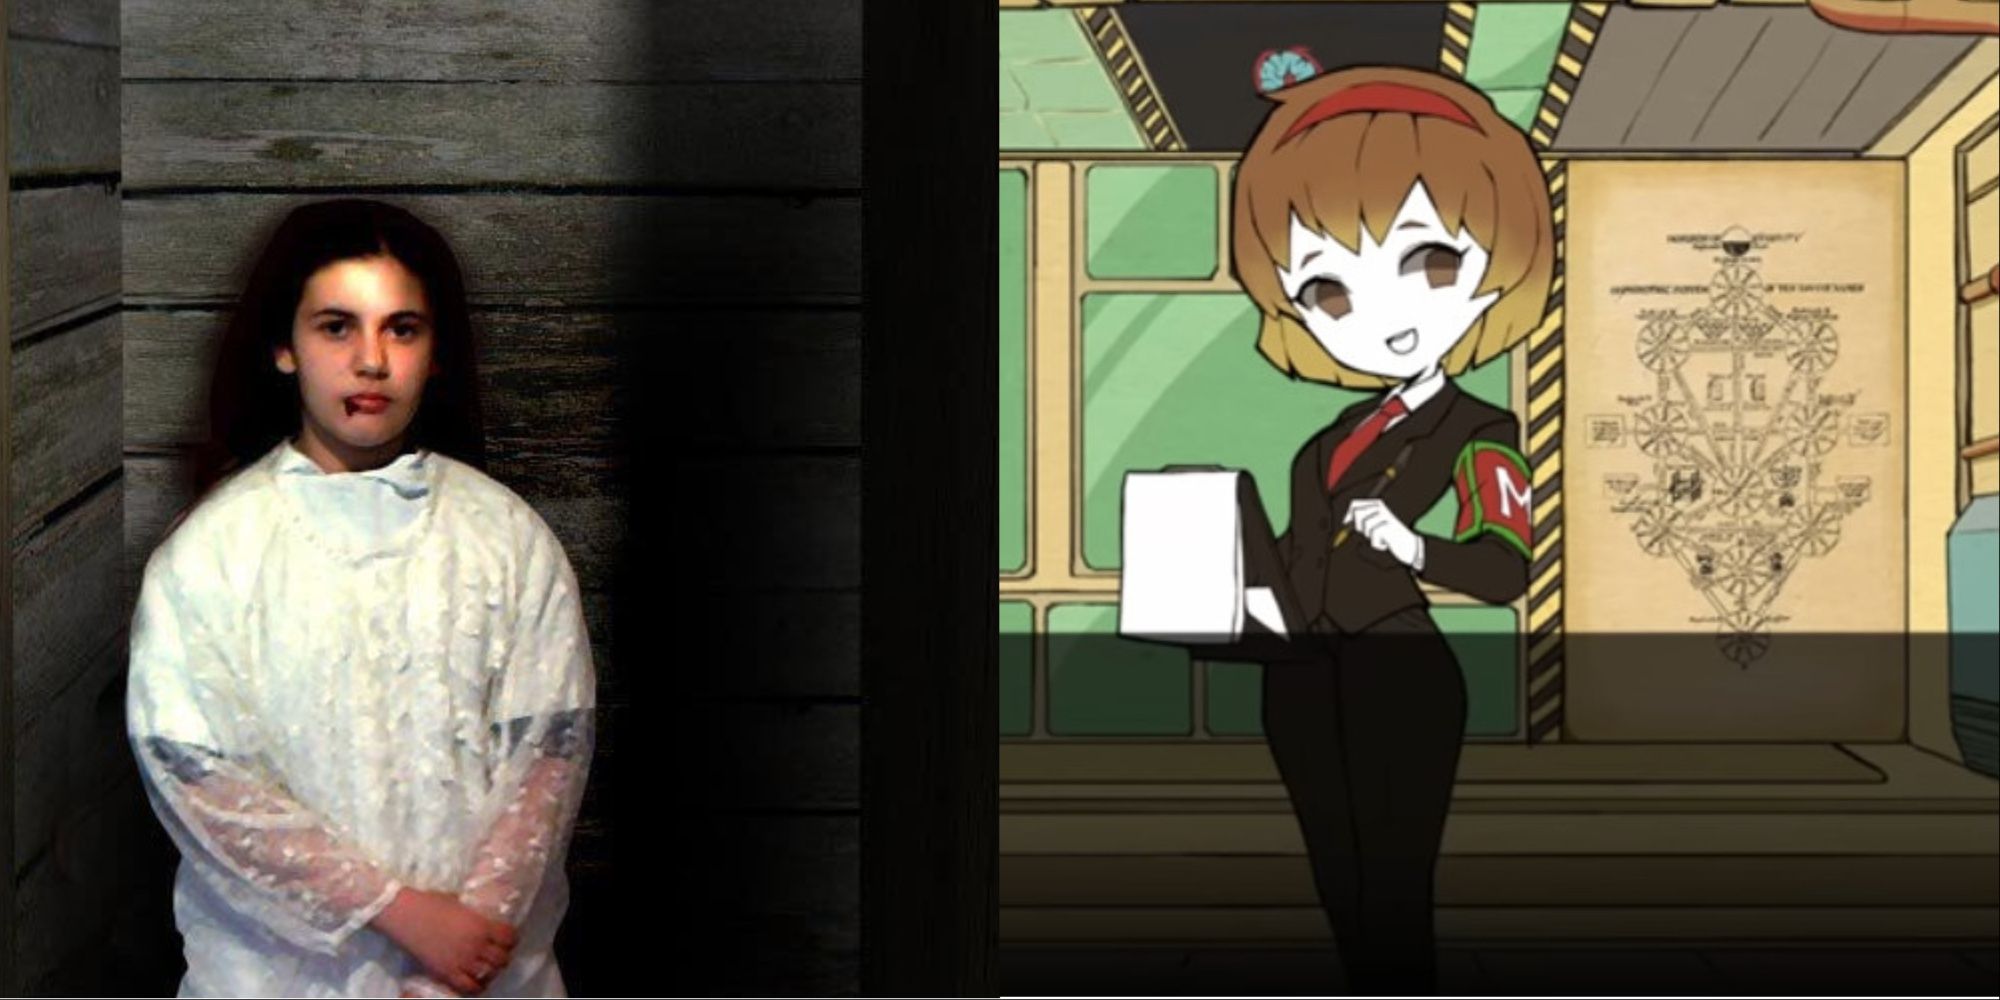 Left: FMV screen of a girl from the game Erevos. Right: Dialog screen from Lobotomy Corporation.